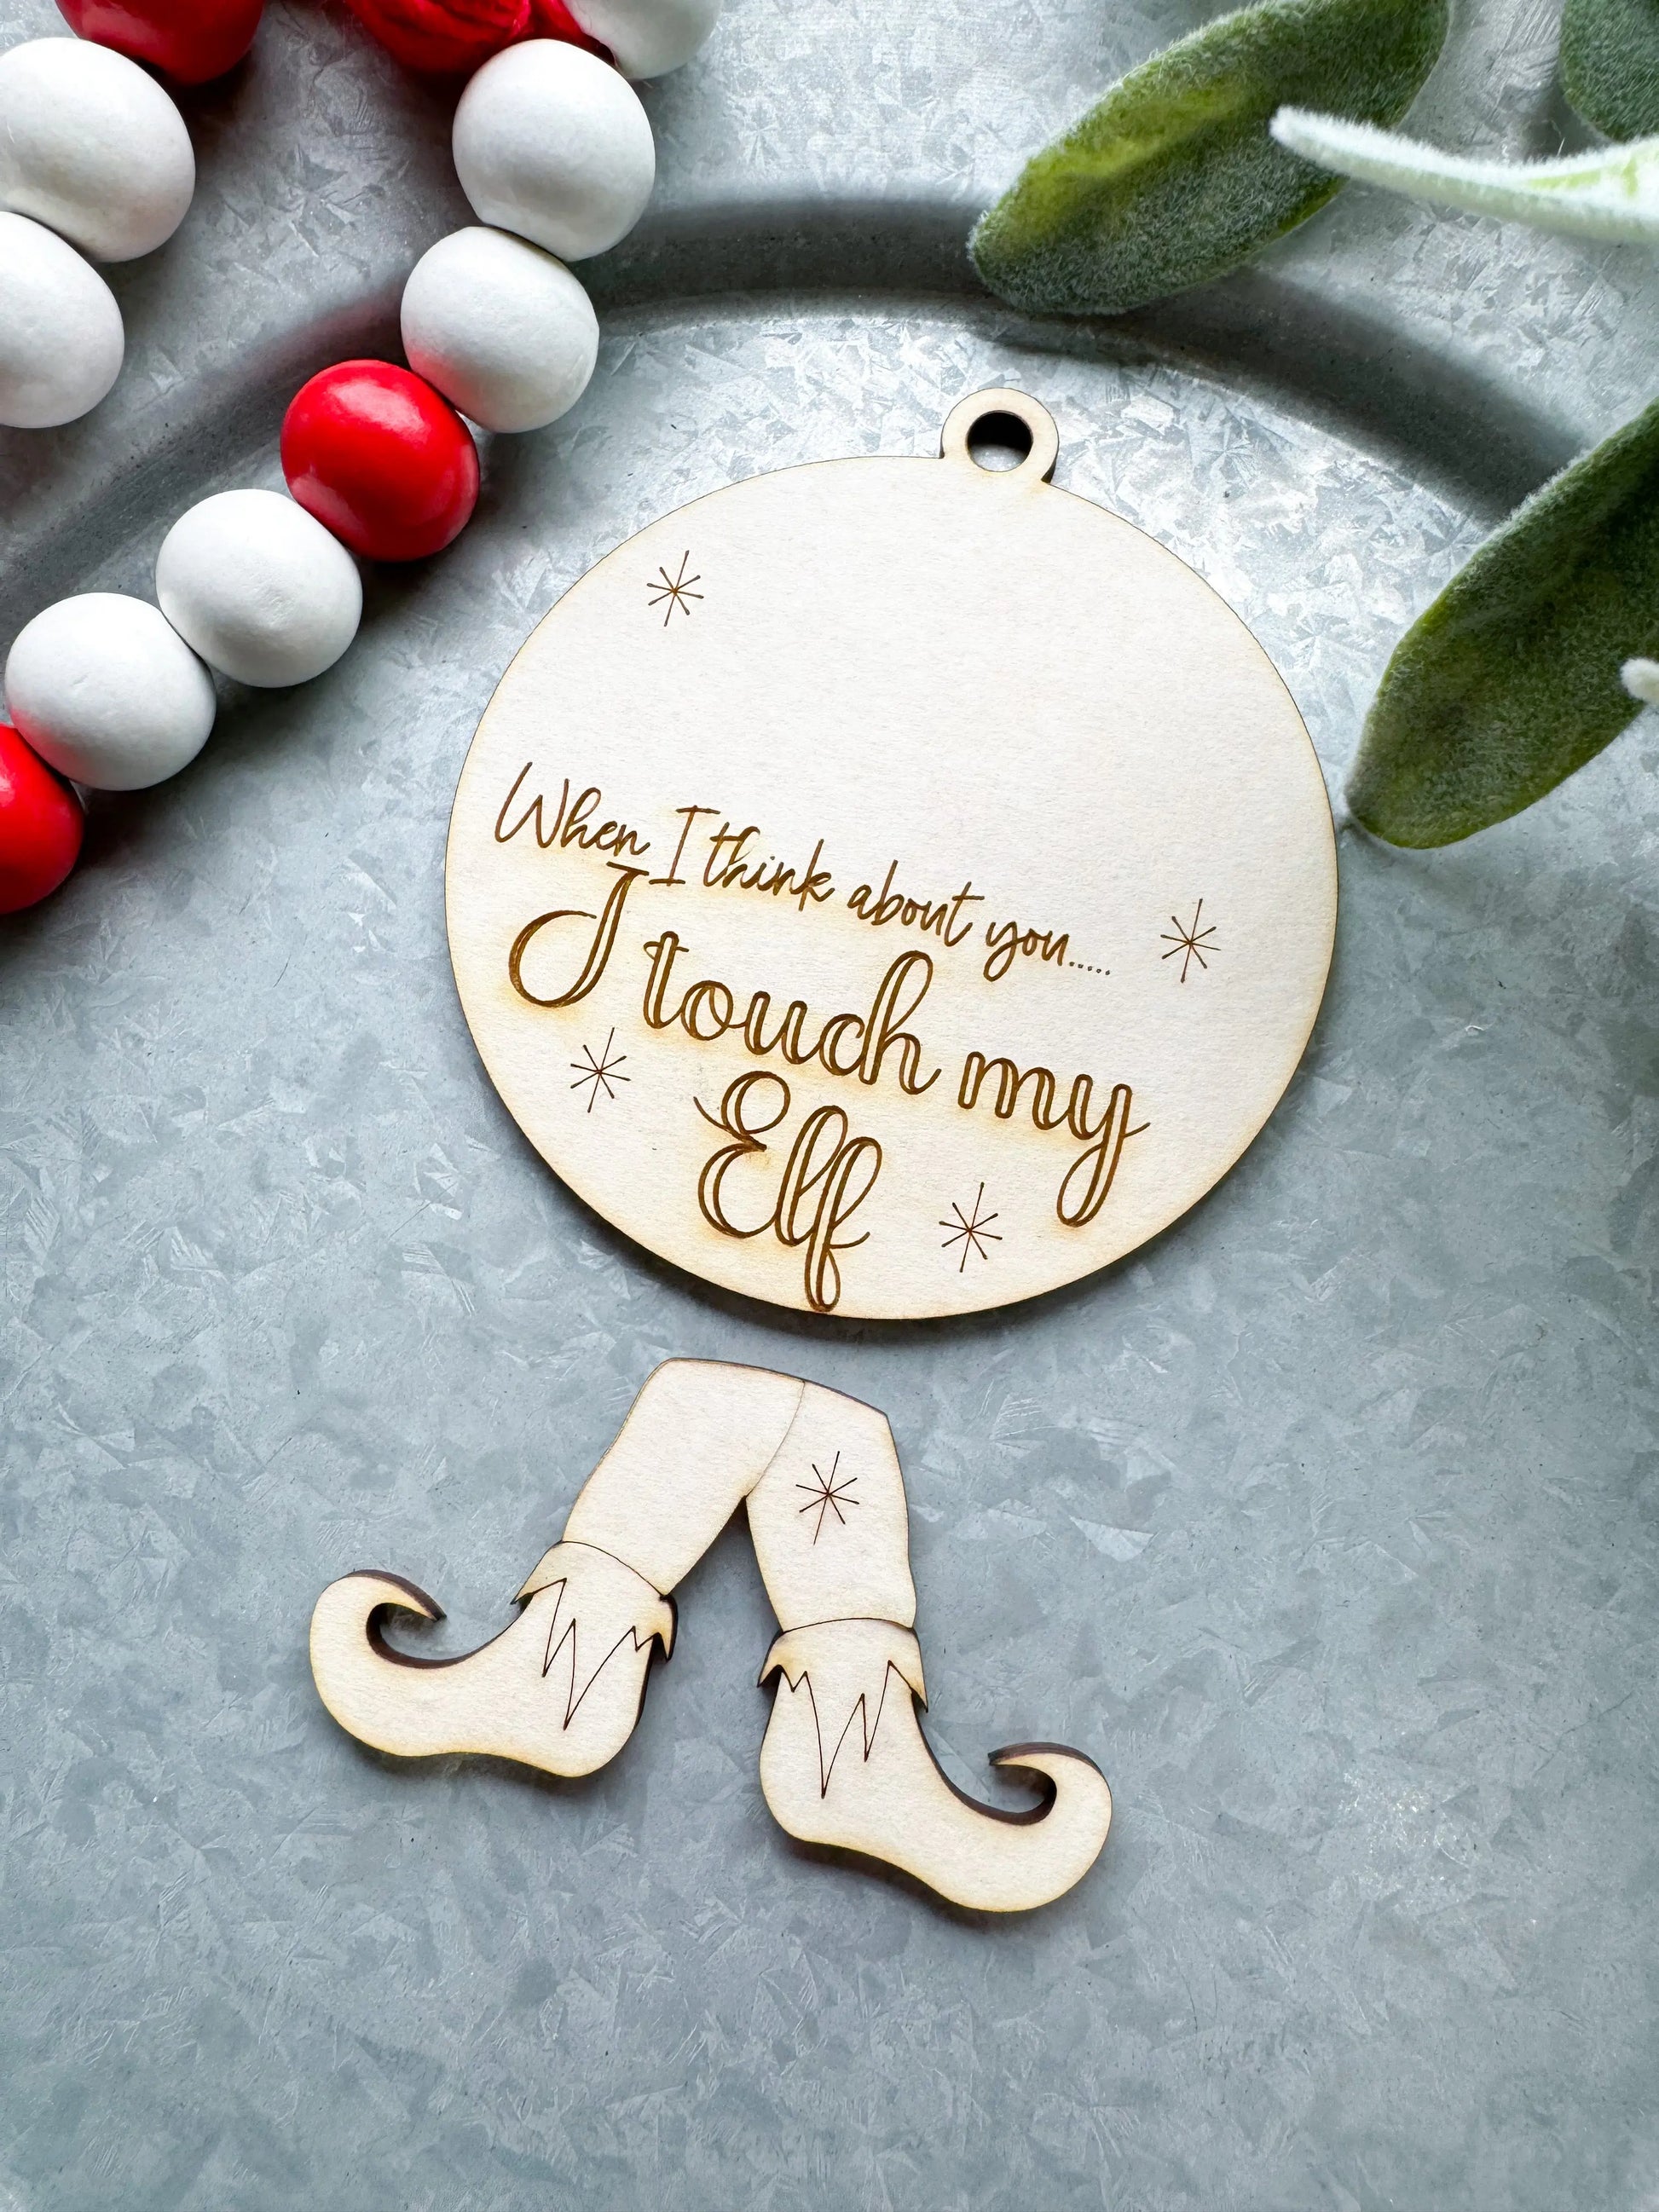 Paint Your Own Naughty Ornaments - Option 1 - Hey There Crafty LLC